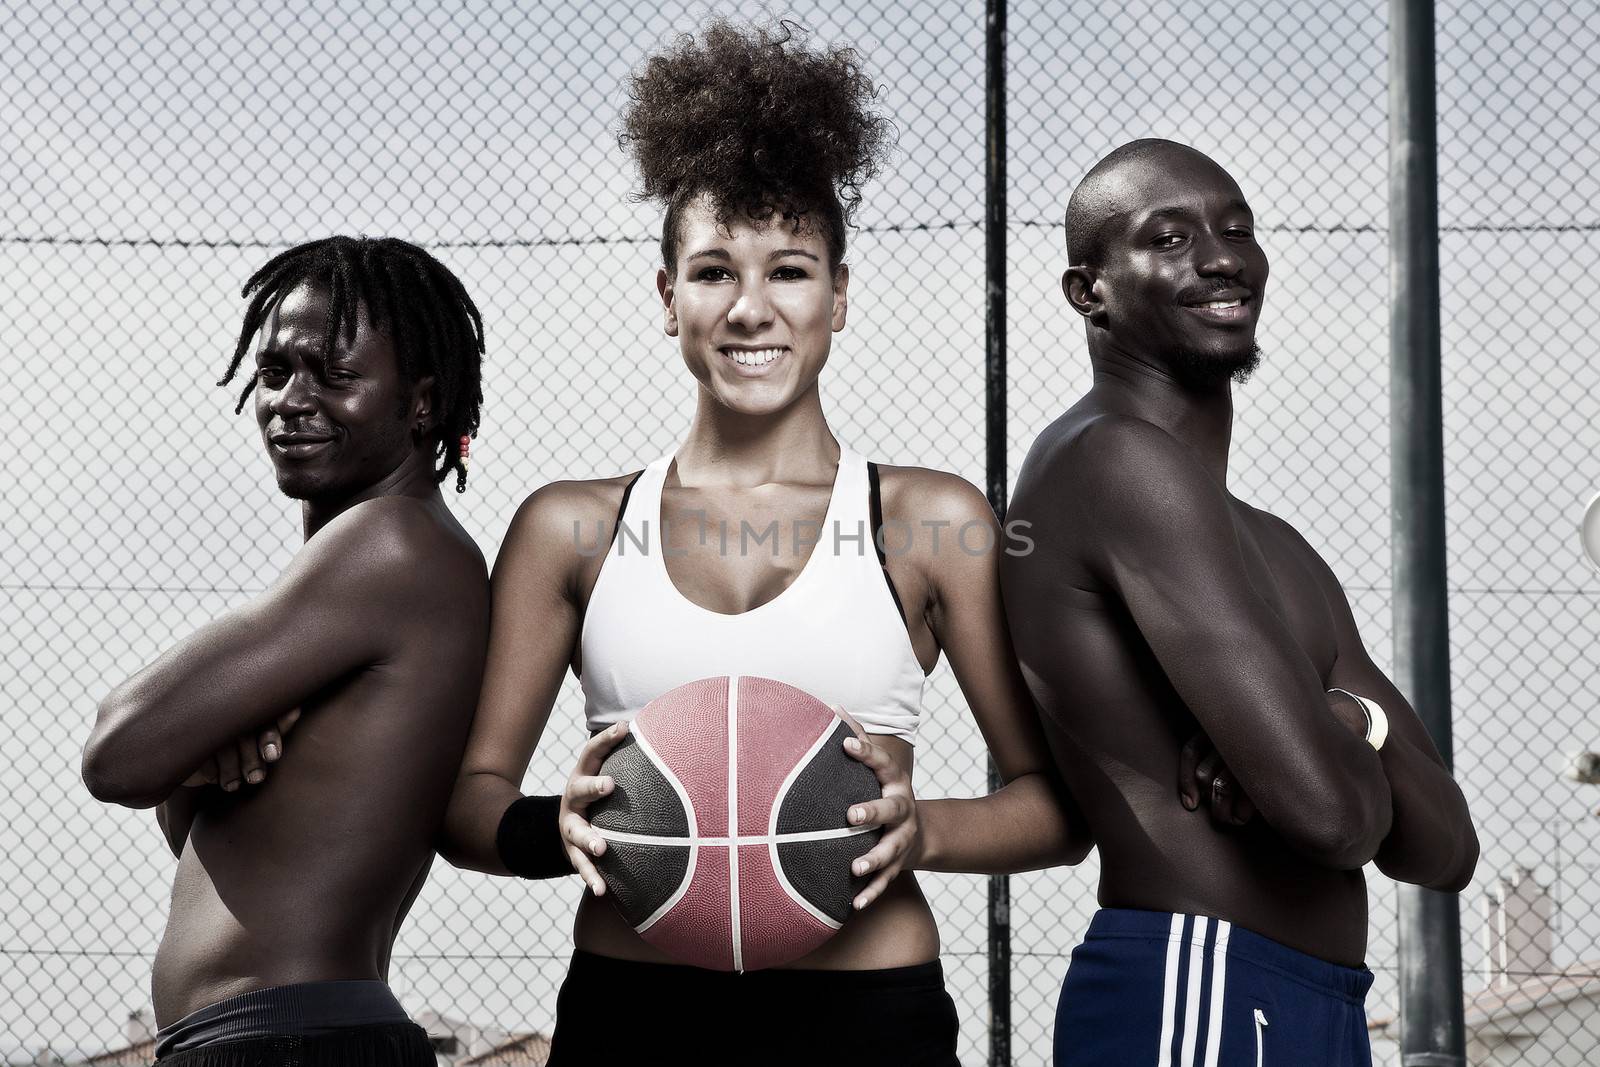 Group portrait of male and female street basket team